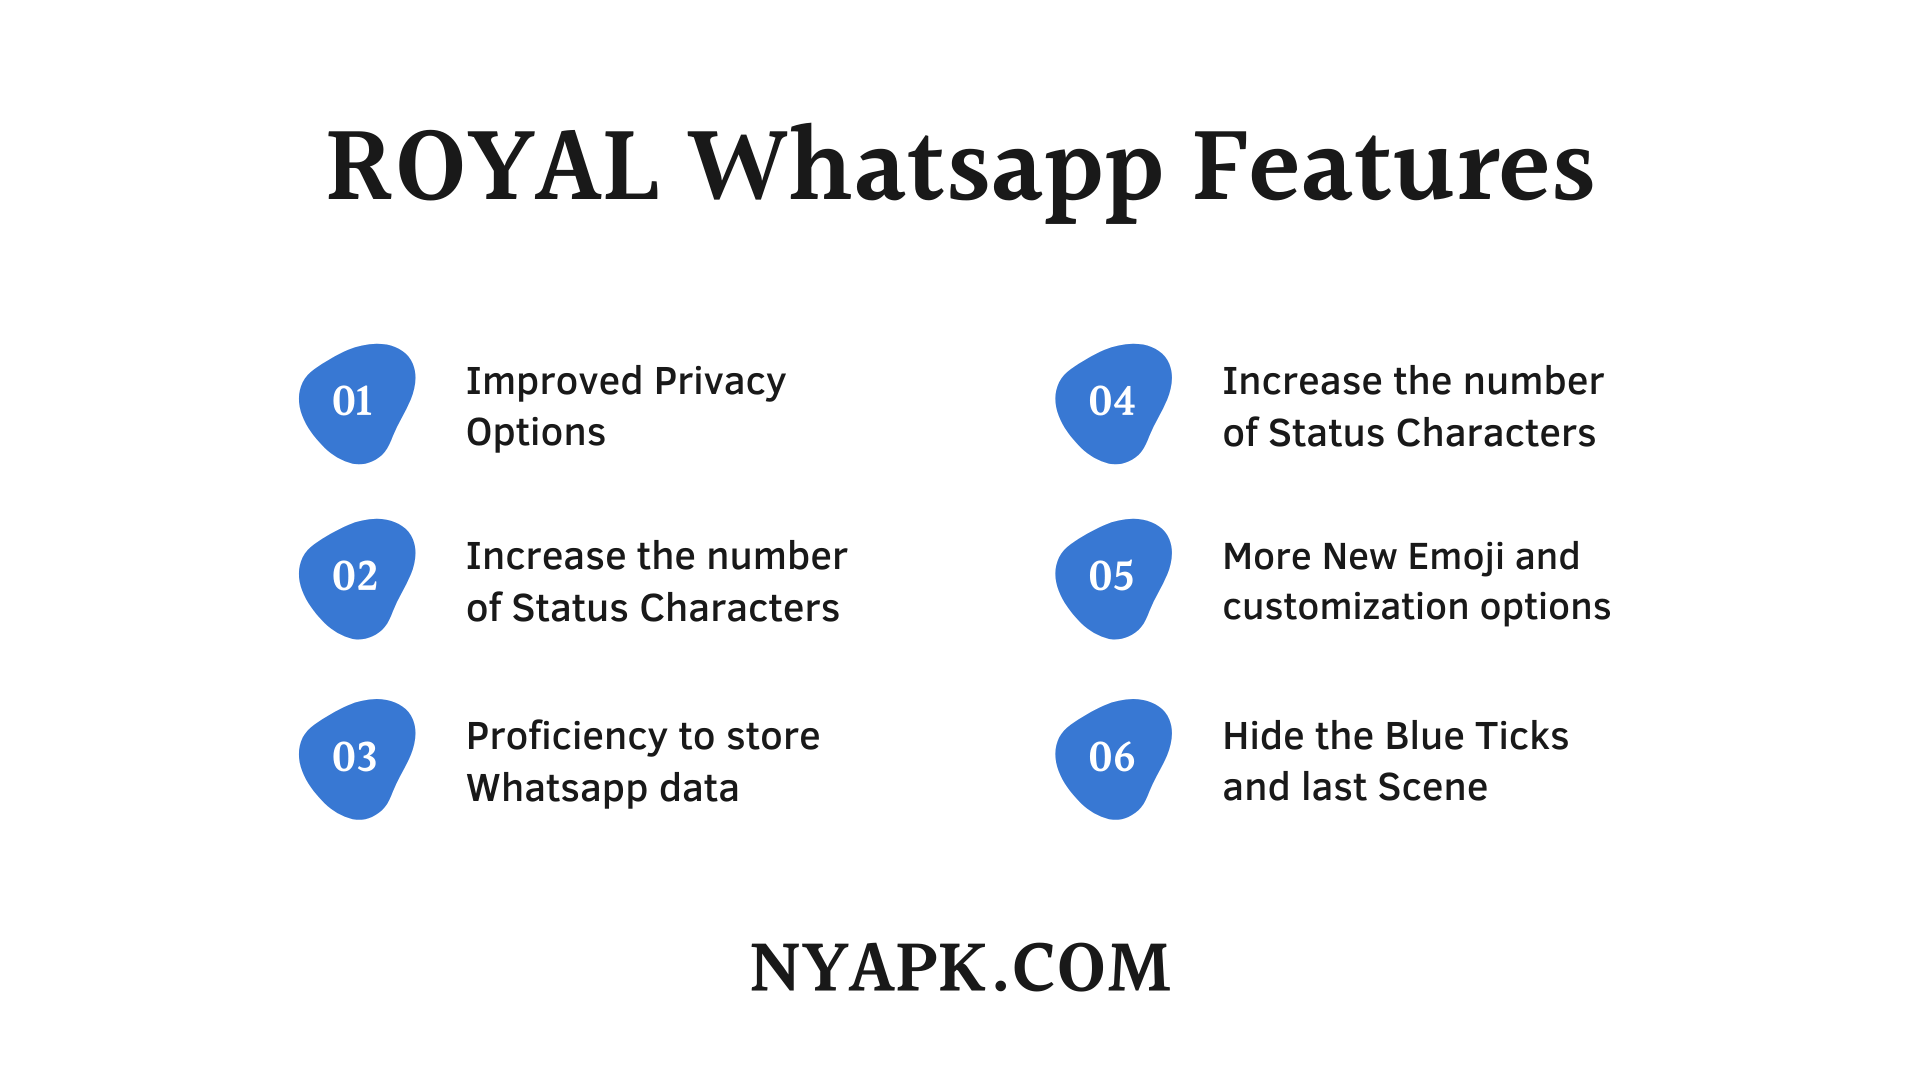 Royal Whatsapp Features